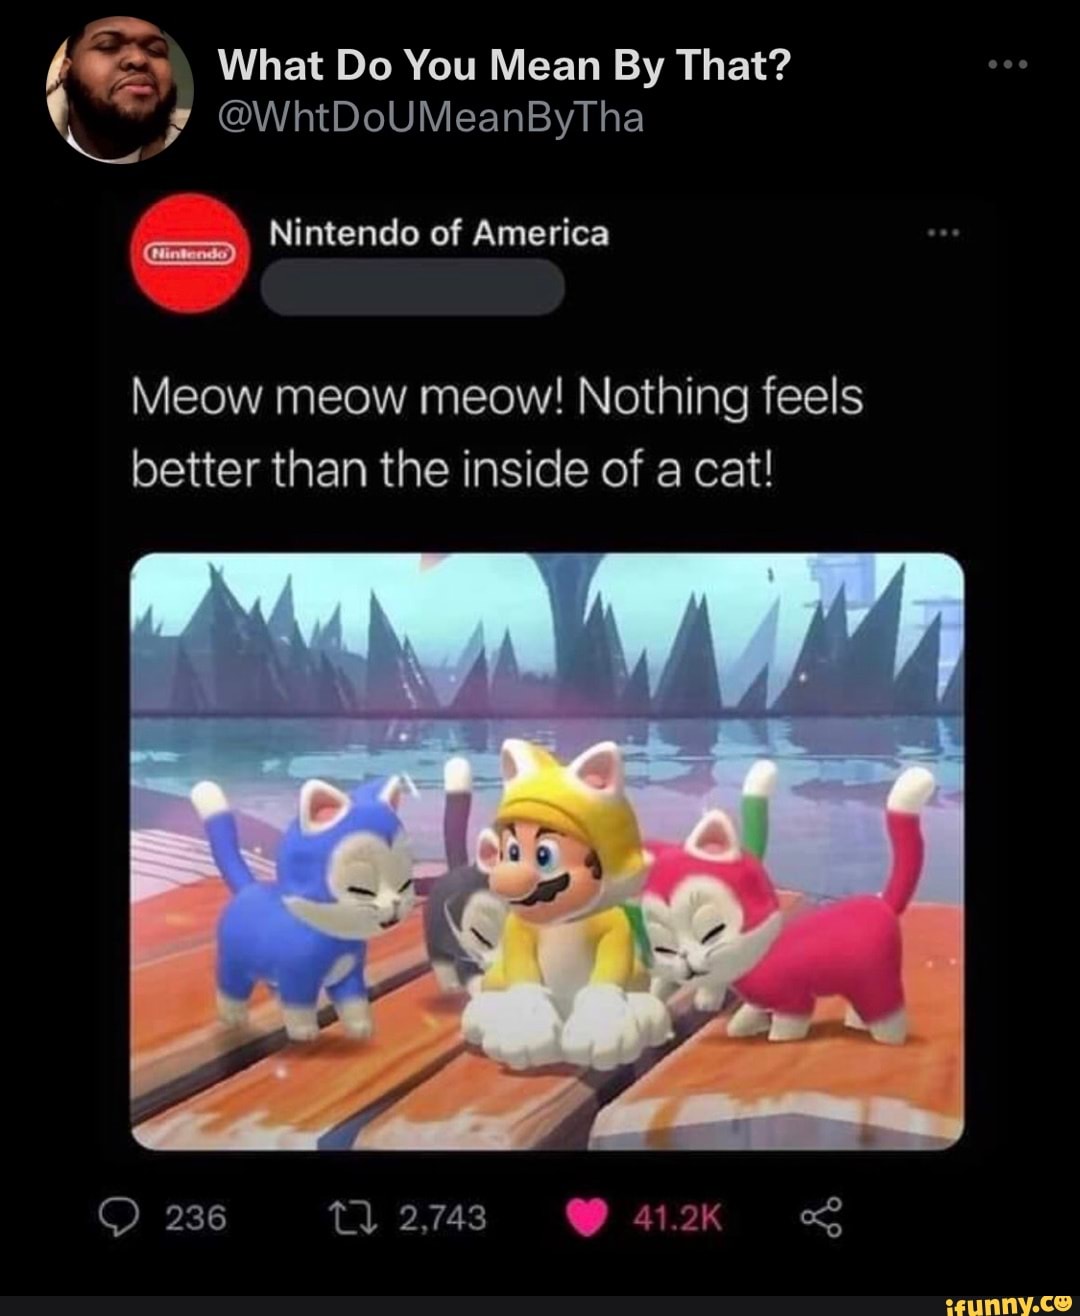 Feel nothing better. Meow Meow Meow nothing feels better than the inside of a Cat. Nintendo of America проекты. Nothing feels better. Nintendo twit nothing feel better than inside Cat.